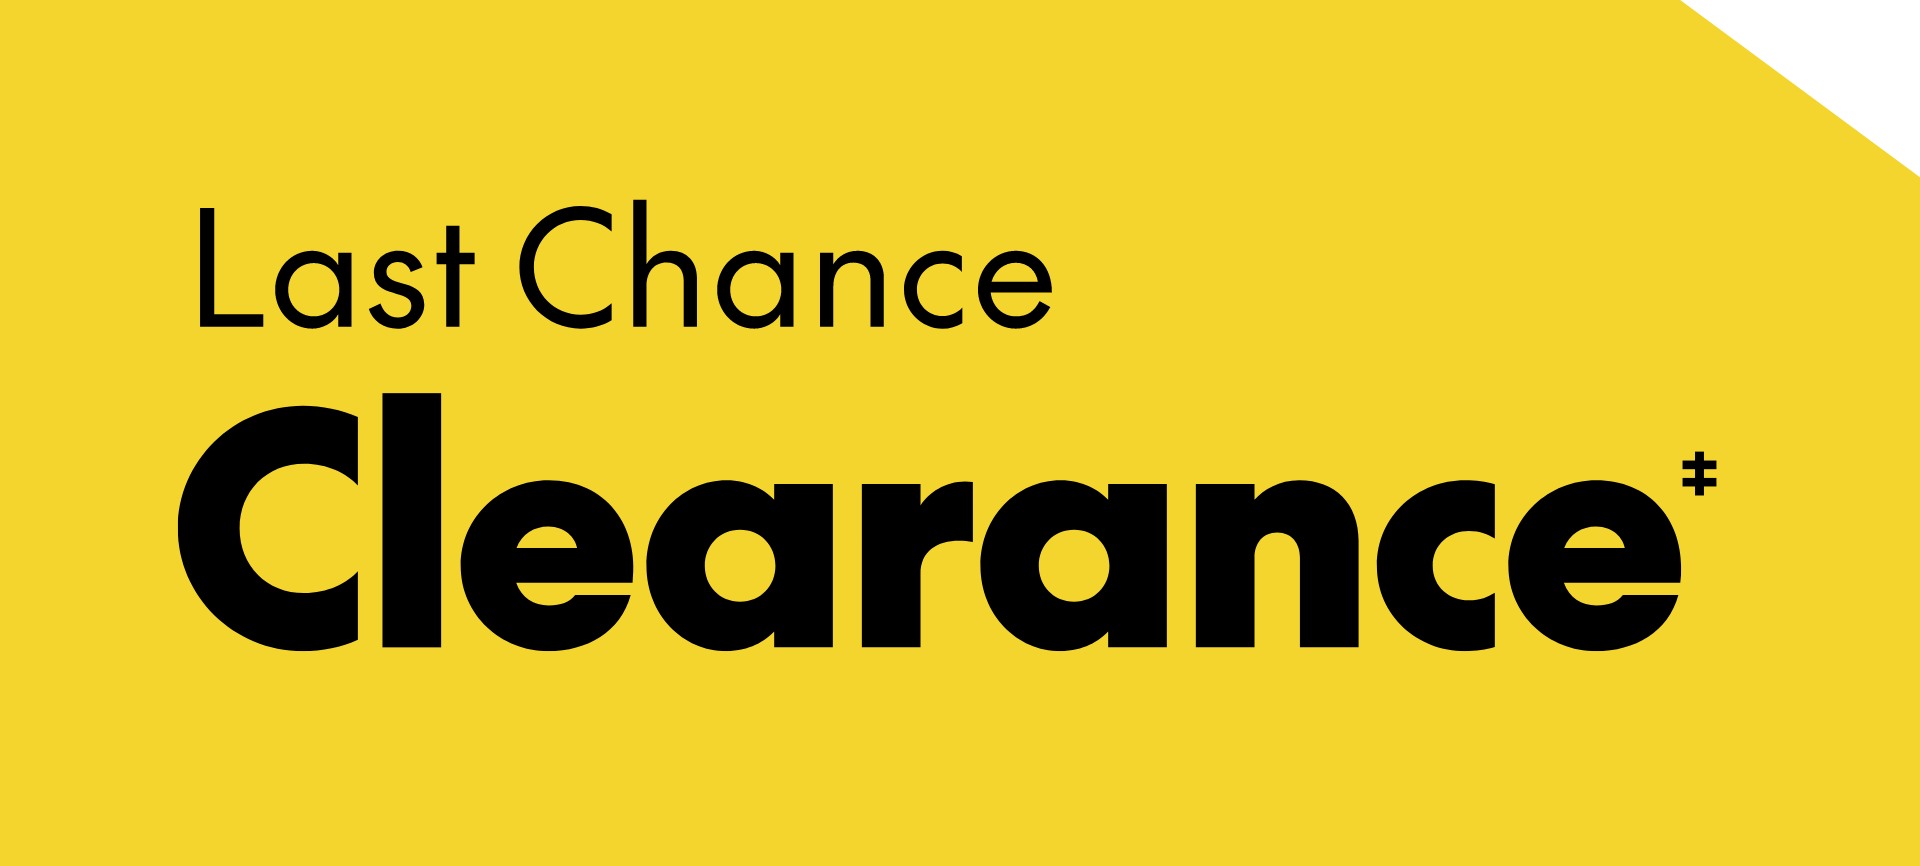 Last Chance Clearance While quantities last. Select brands & styles.